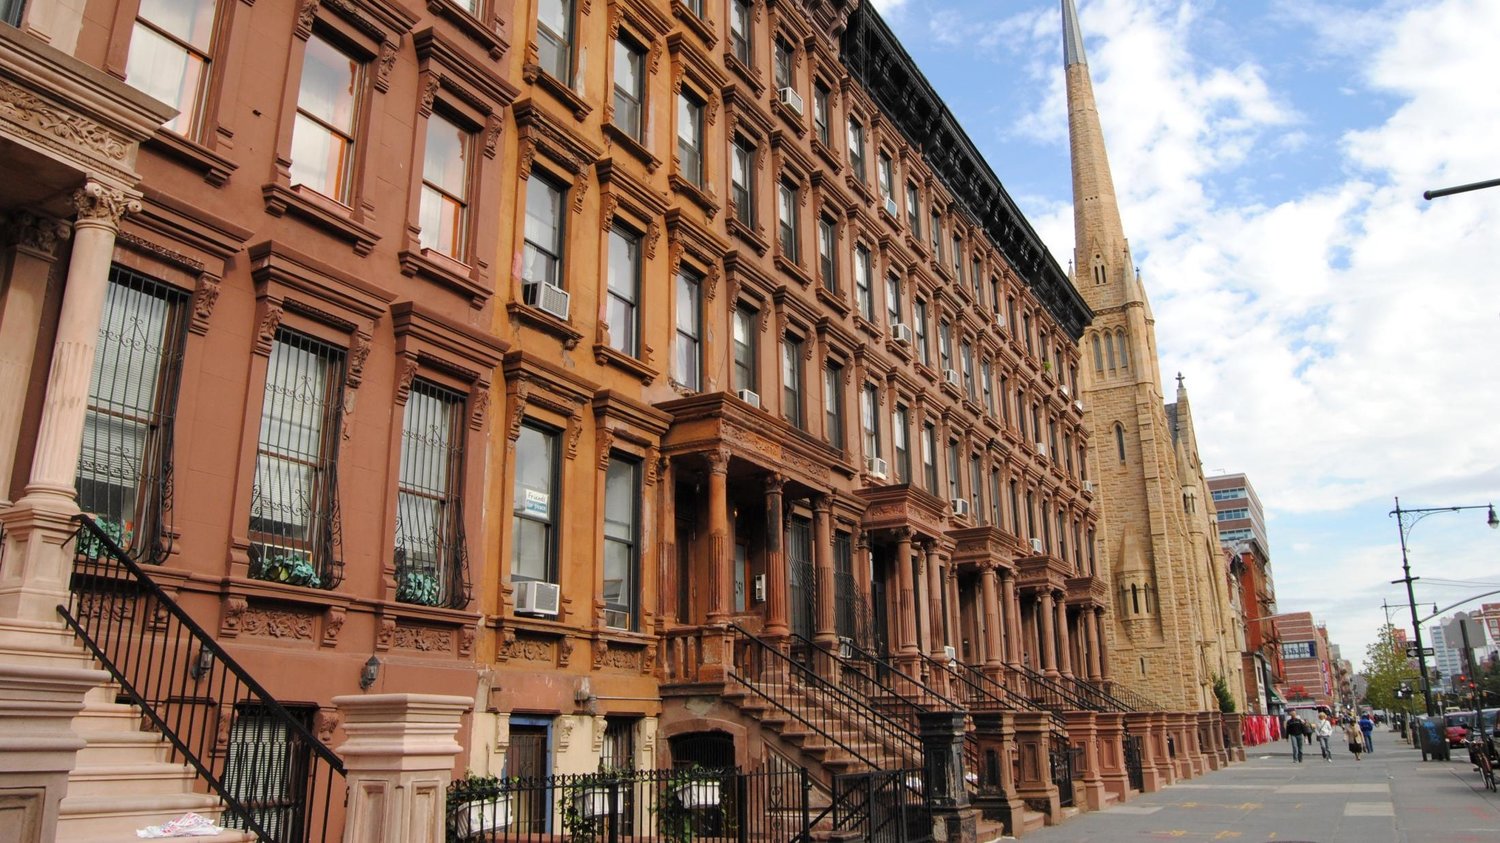 Harlem Is Poised To Be One Of Manhattan’s Most In-Demand Neighborhoods